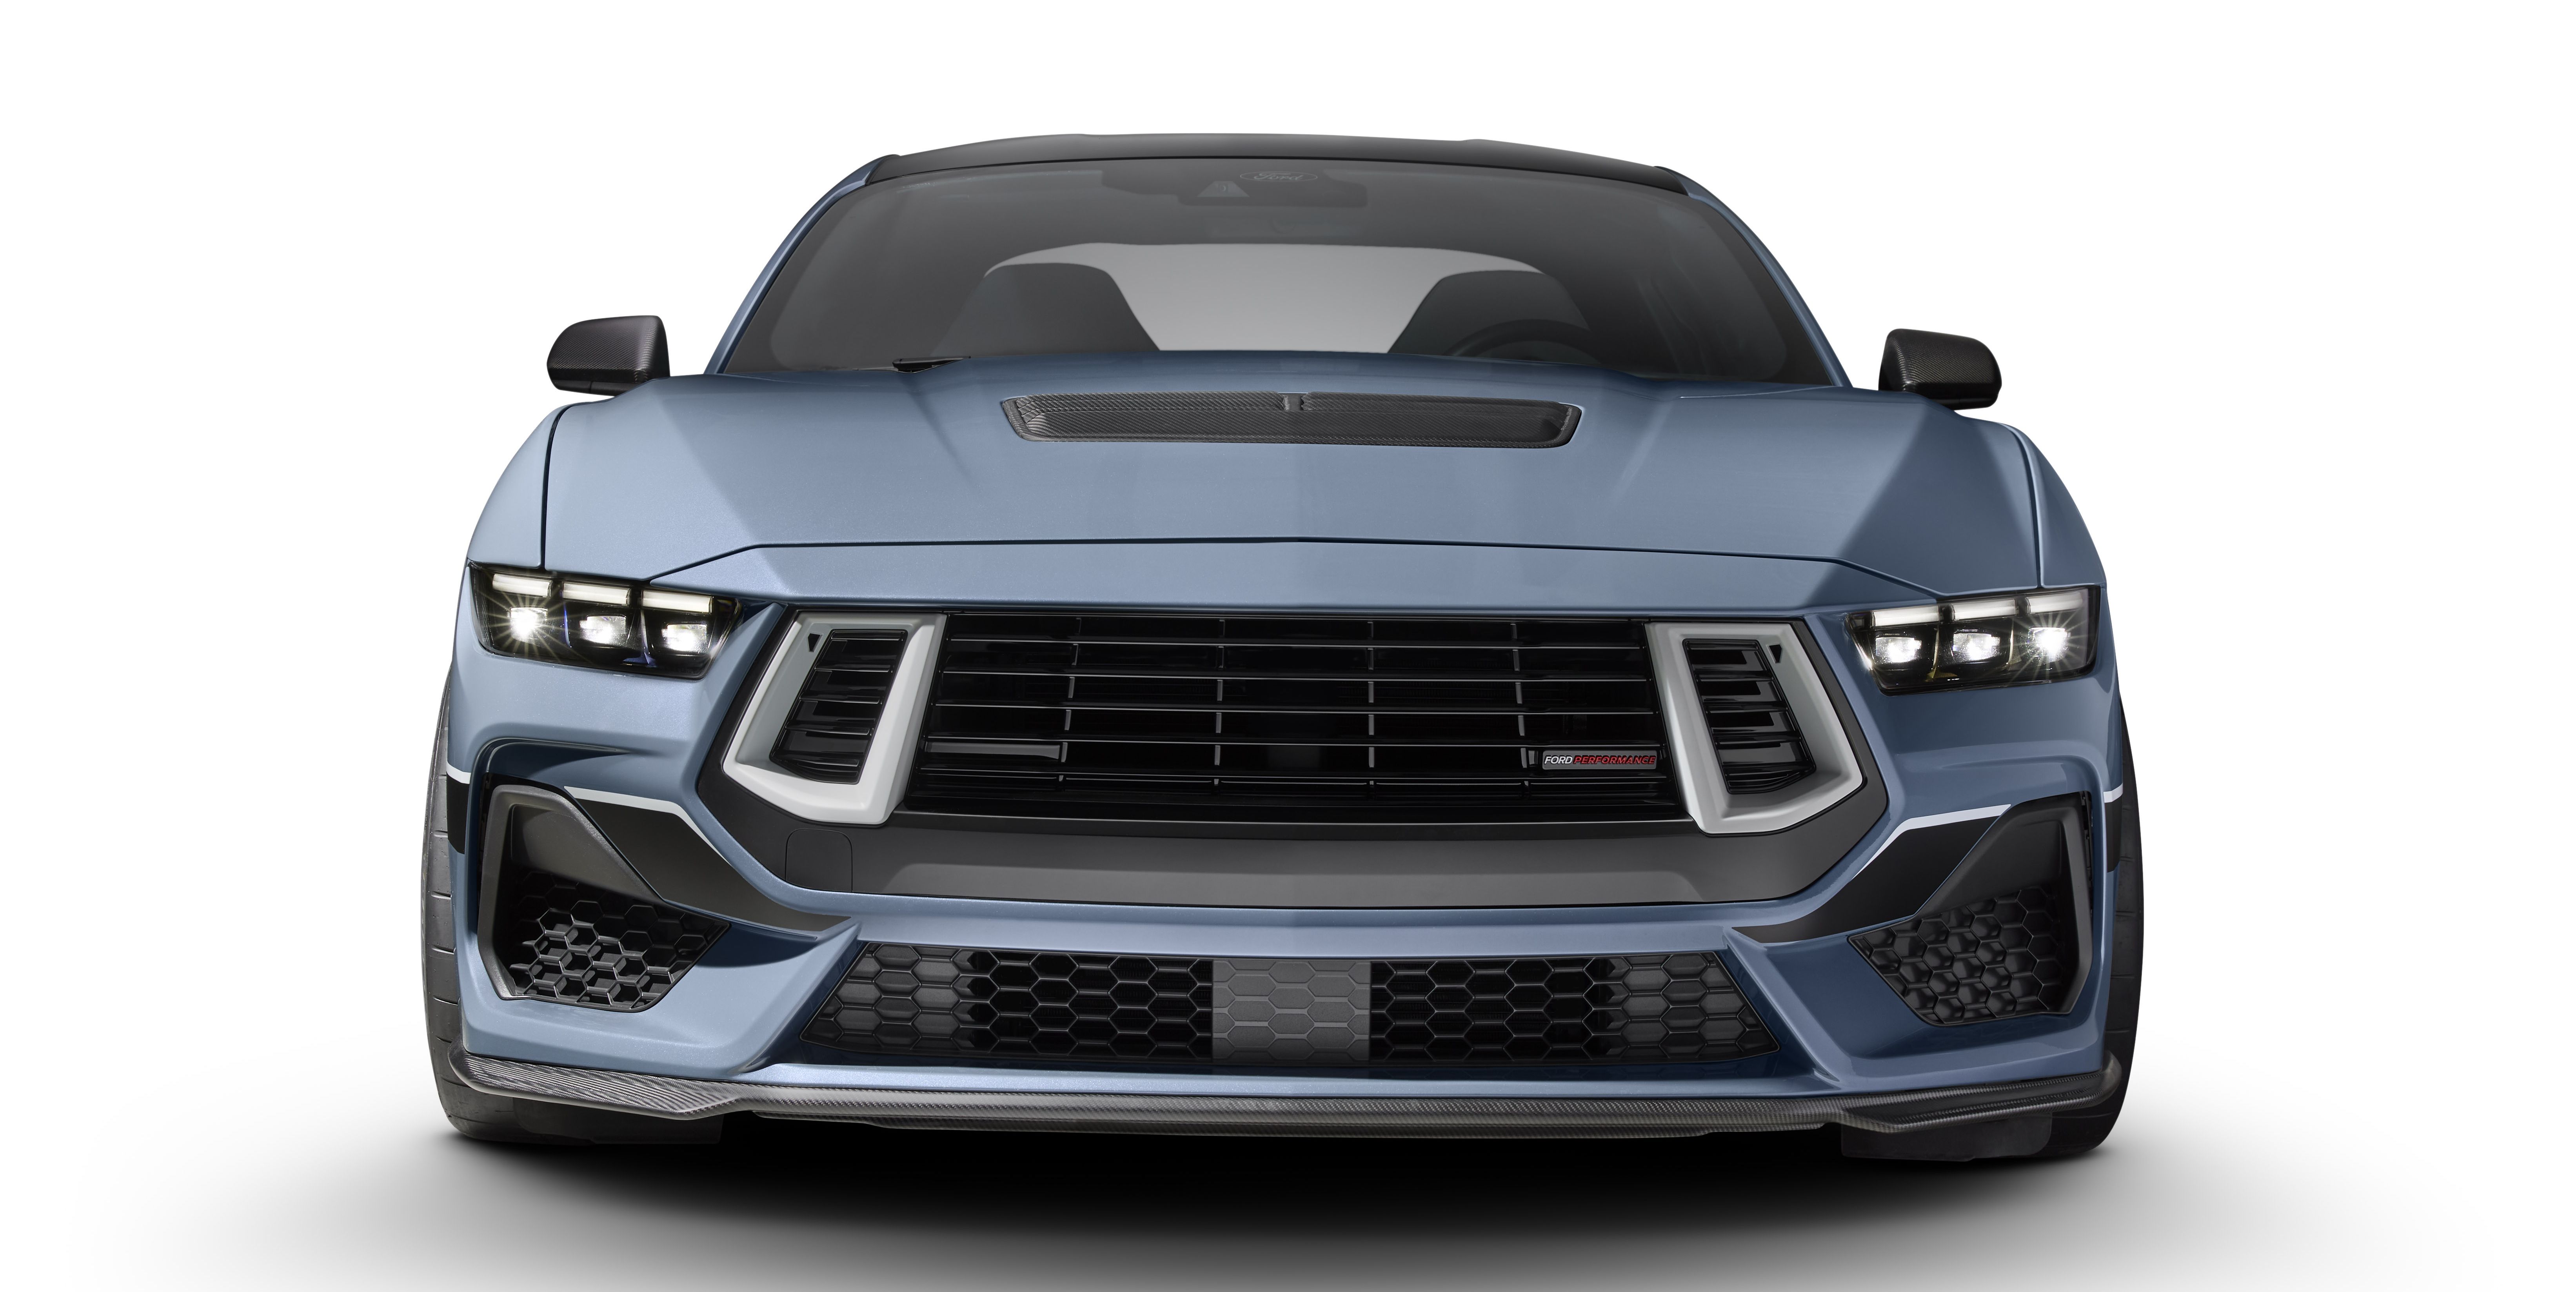 New Ford Performance Supercharger Kit Brings 800 HP to S650 Mustang